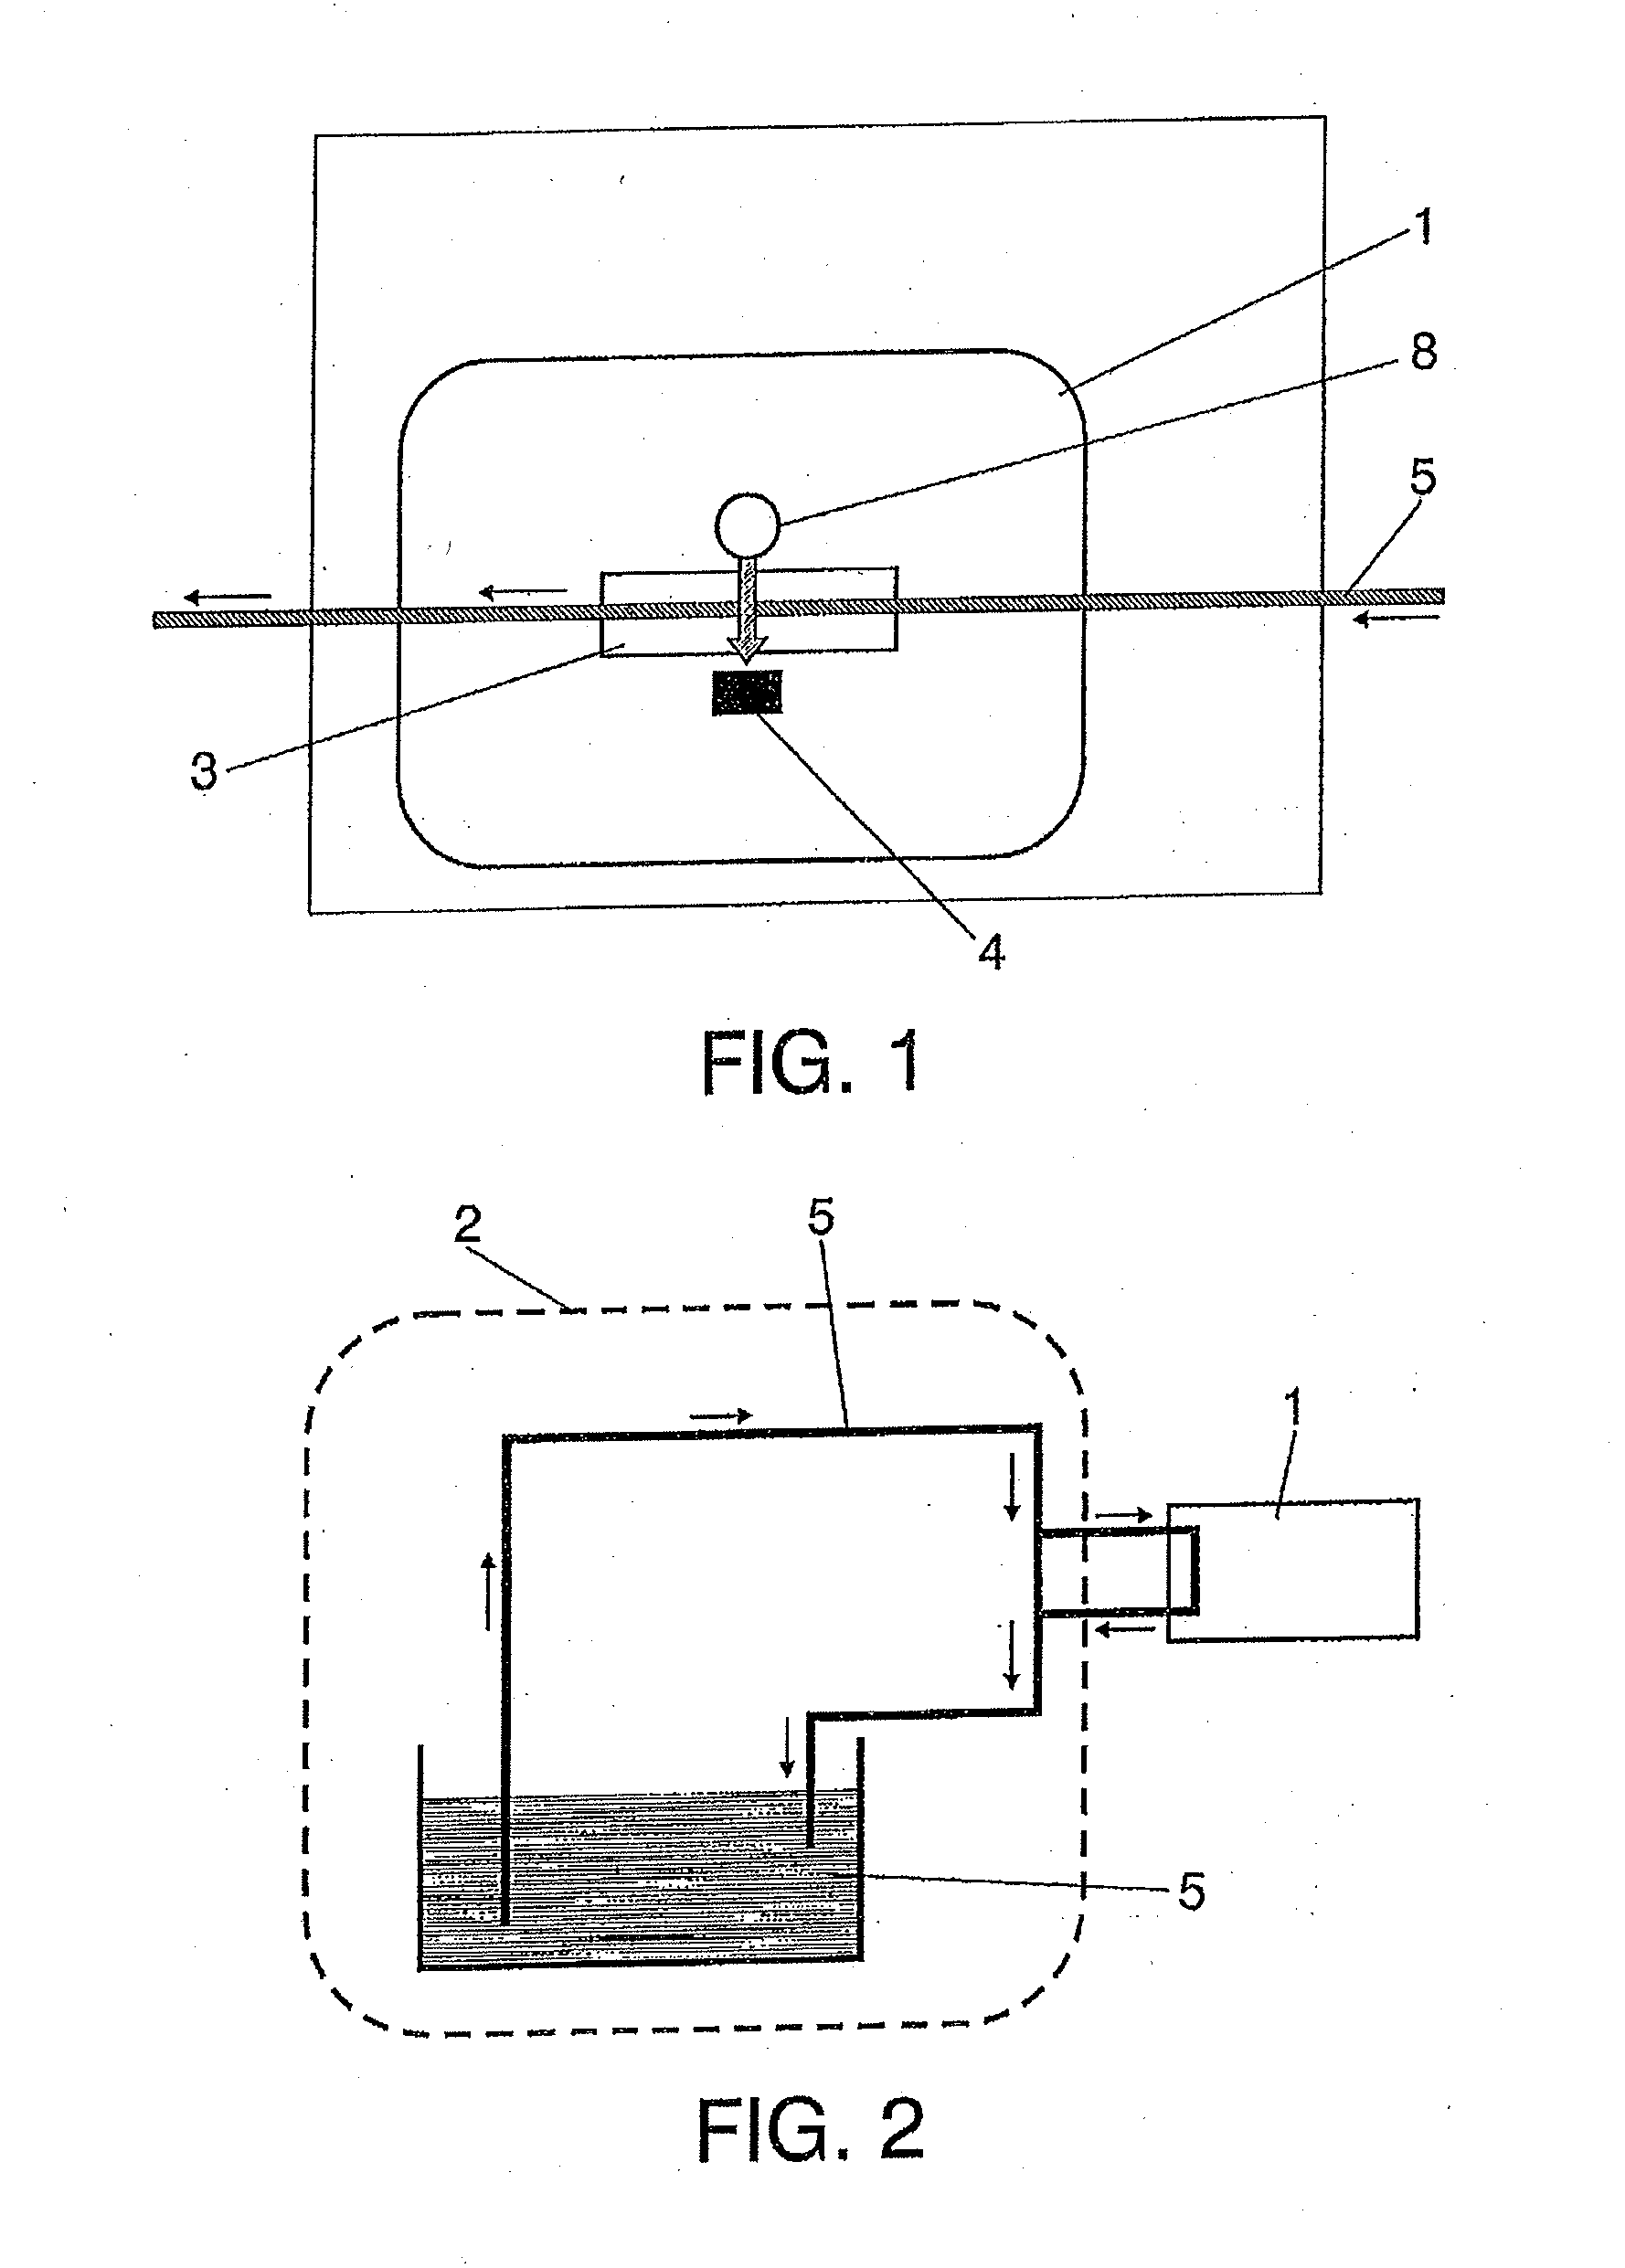 Method and Device For Determining the State of Degradation of a Lubricant Oil